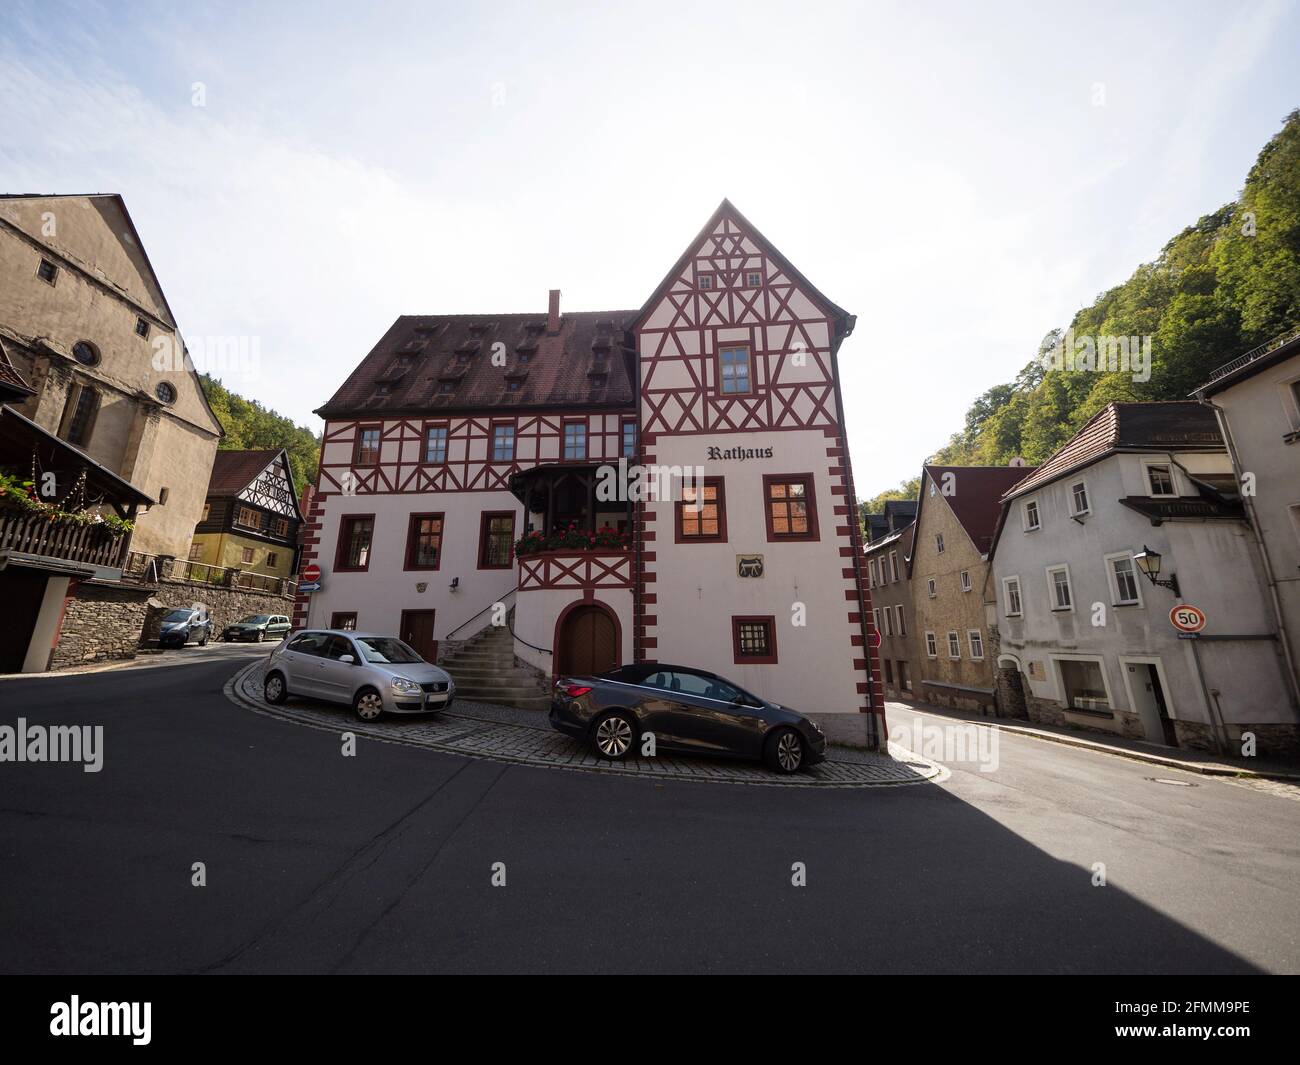 Cityscape panorama of historic old vintage half-timbered architecture town hall building of Ziegenruck Saale Orla Kreis Thuringia Germany Europe Stock Photo